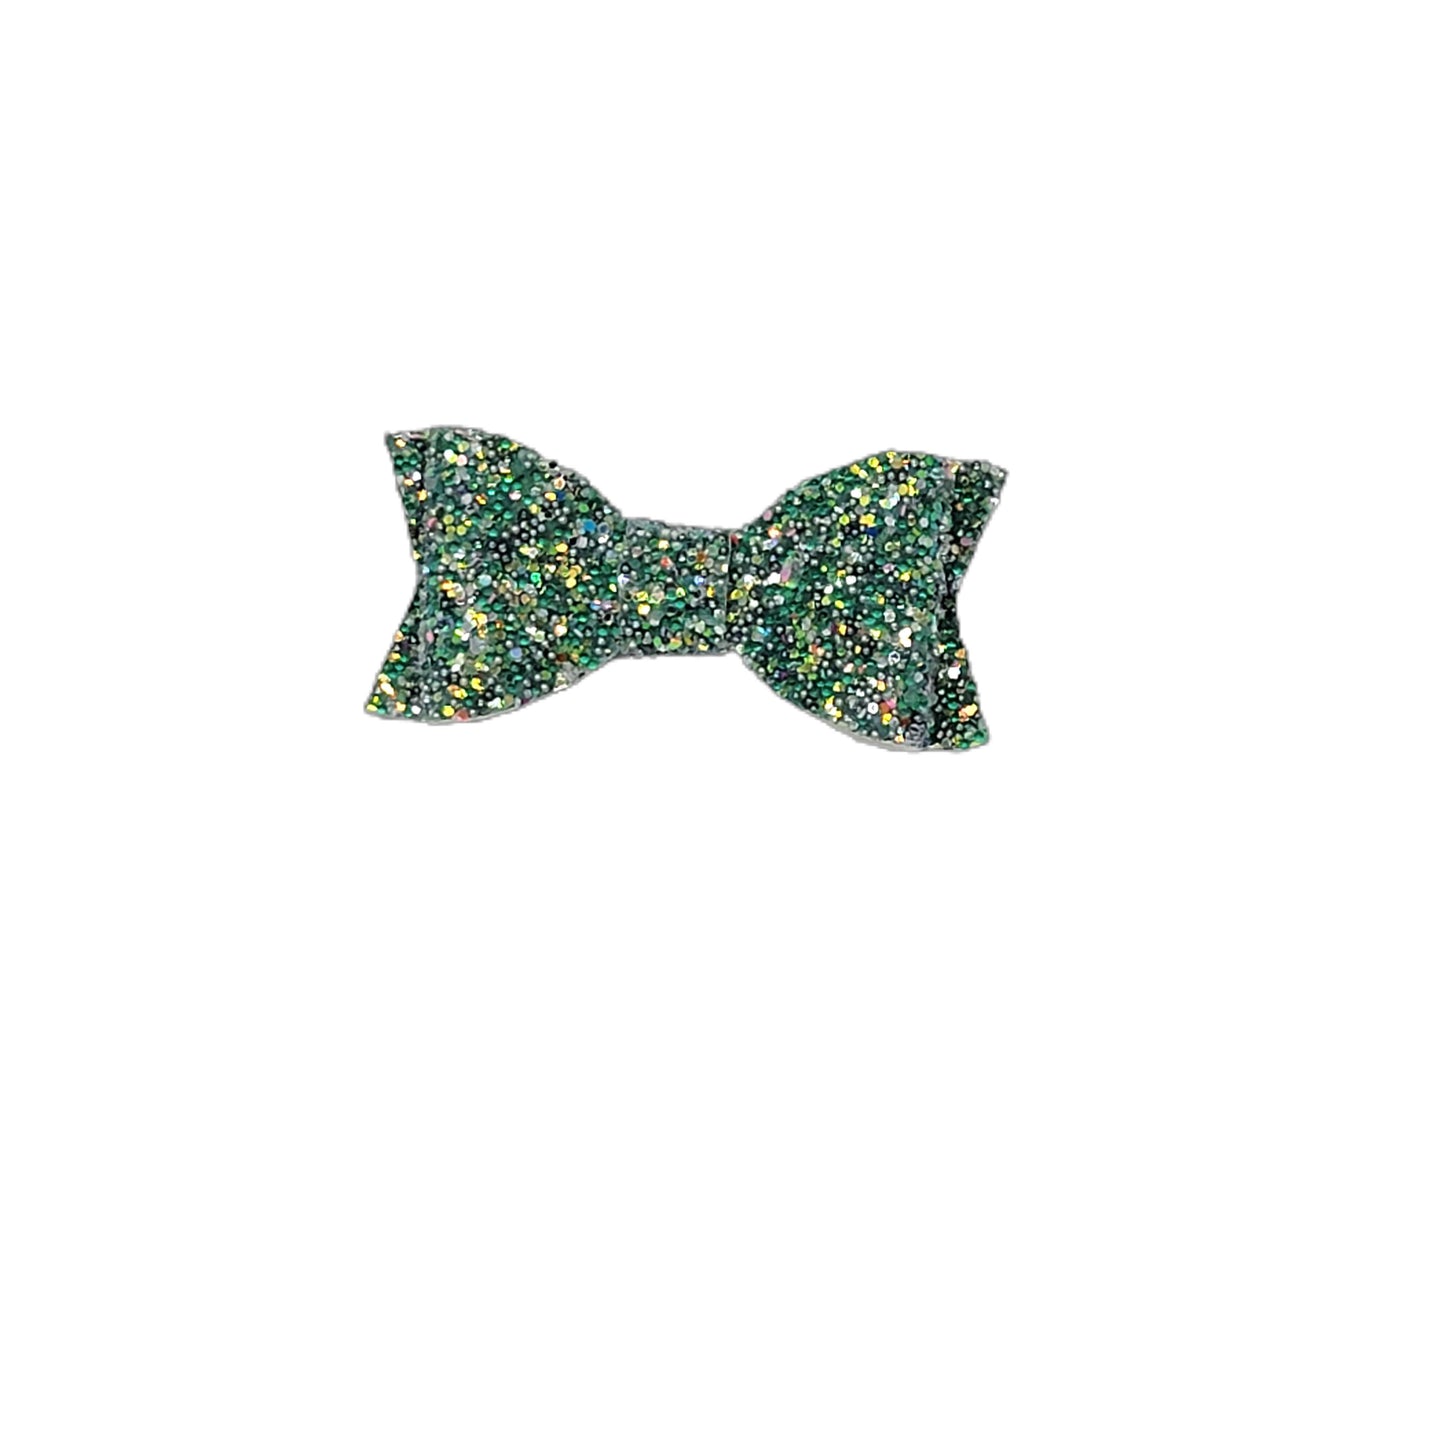 Green Beaded Glitter Claire Bow (pair) 2.75"